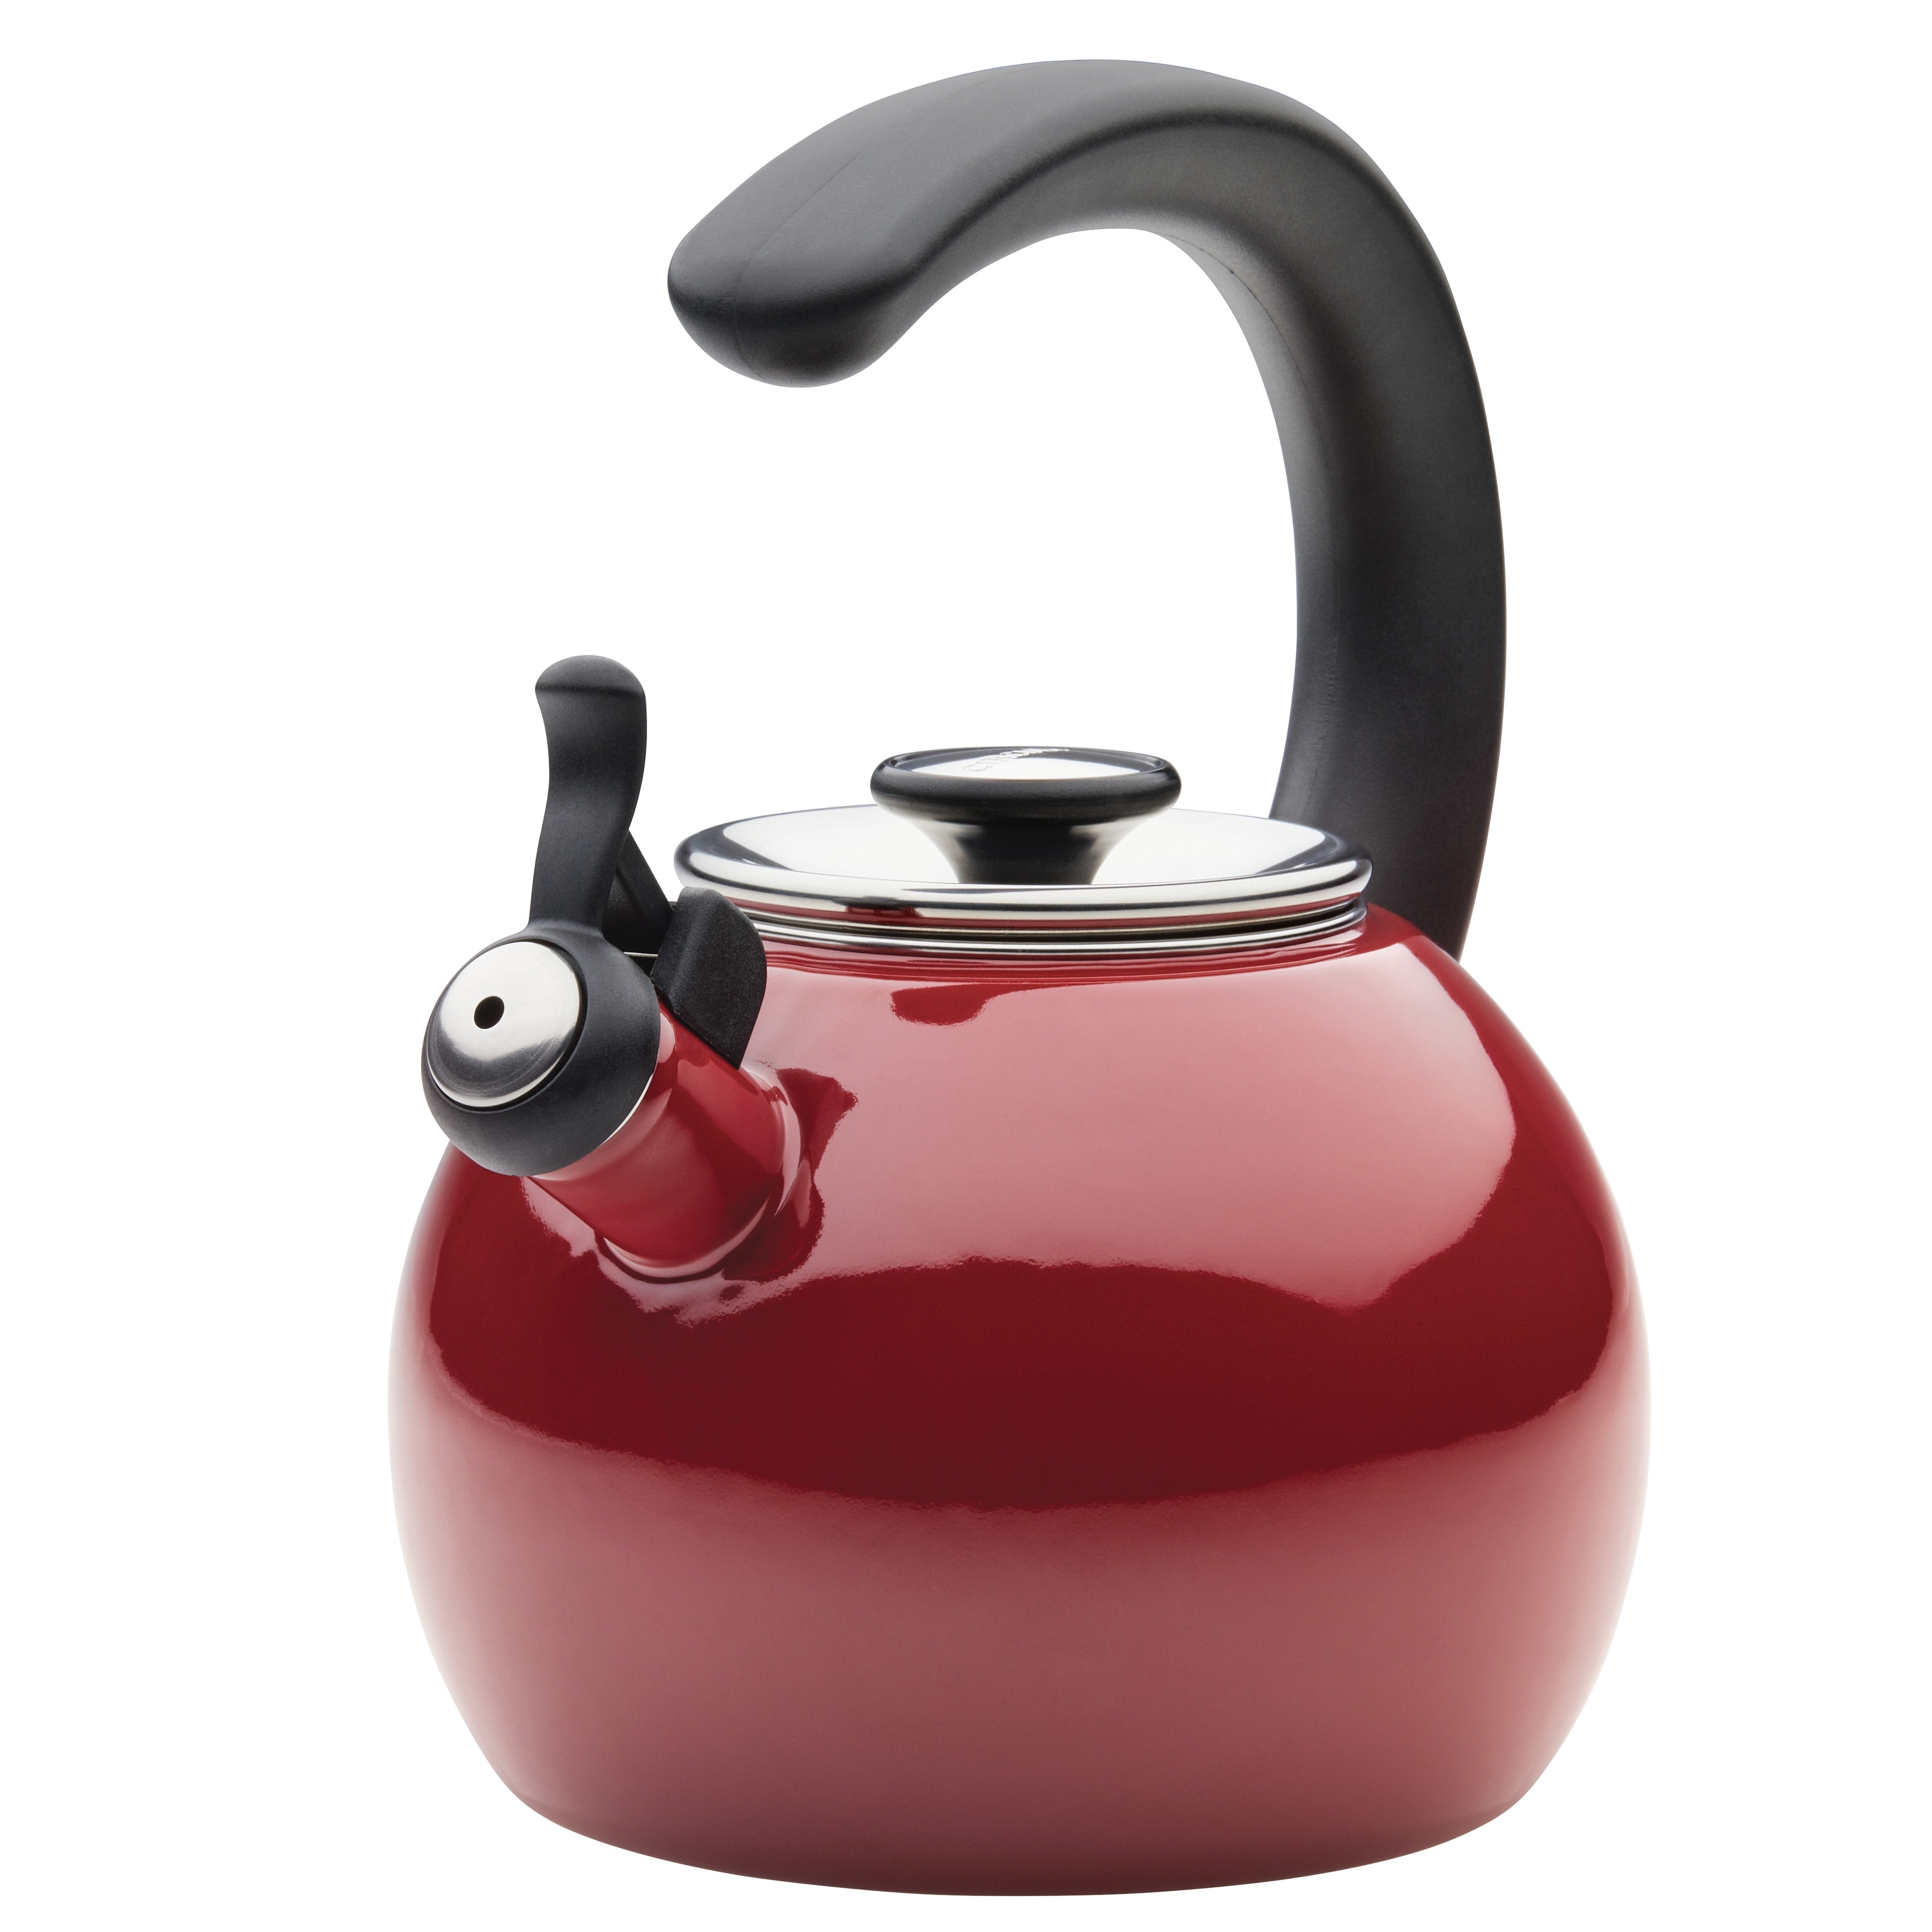 https://ak1.ostkcdn.com/images/products/is/images/direct/ecbd38ce05d7c14c63c40a50858fcad548bfba9f/Circulon-Enamel-on-Steel-Whistling-Induction-Teakettle-With-Flip-Up-Spout%2C-2-Quart%2C-Navy.jpg